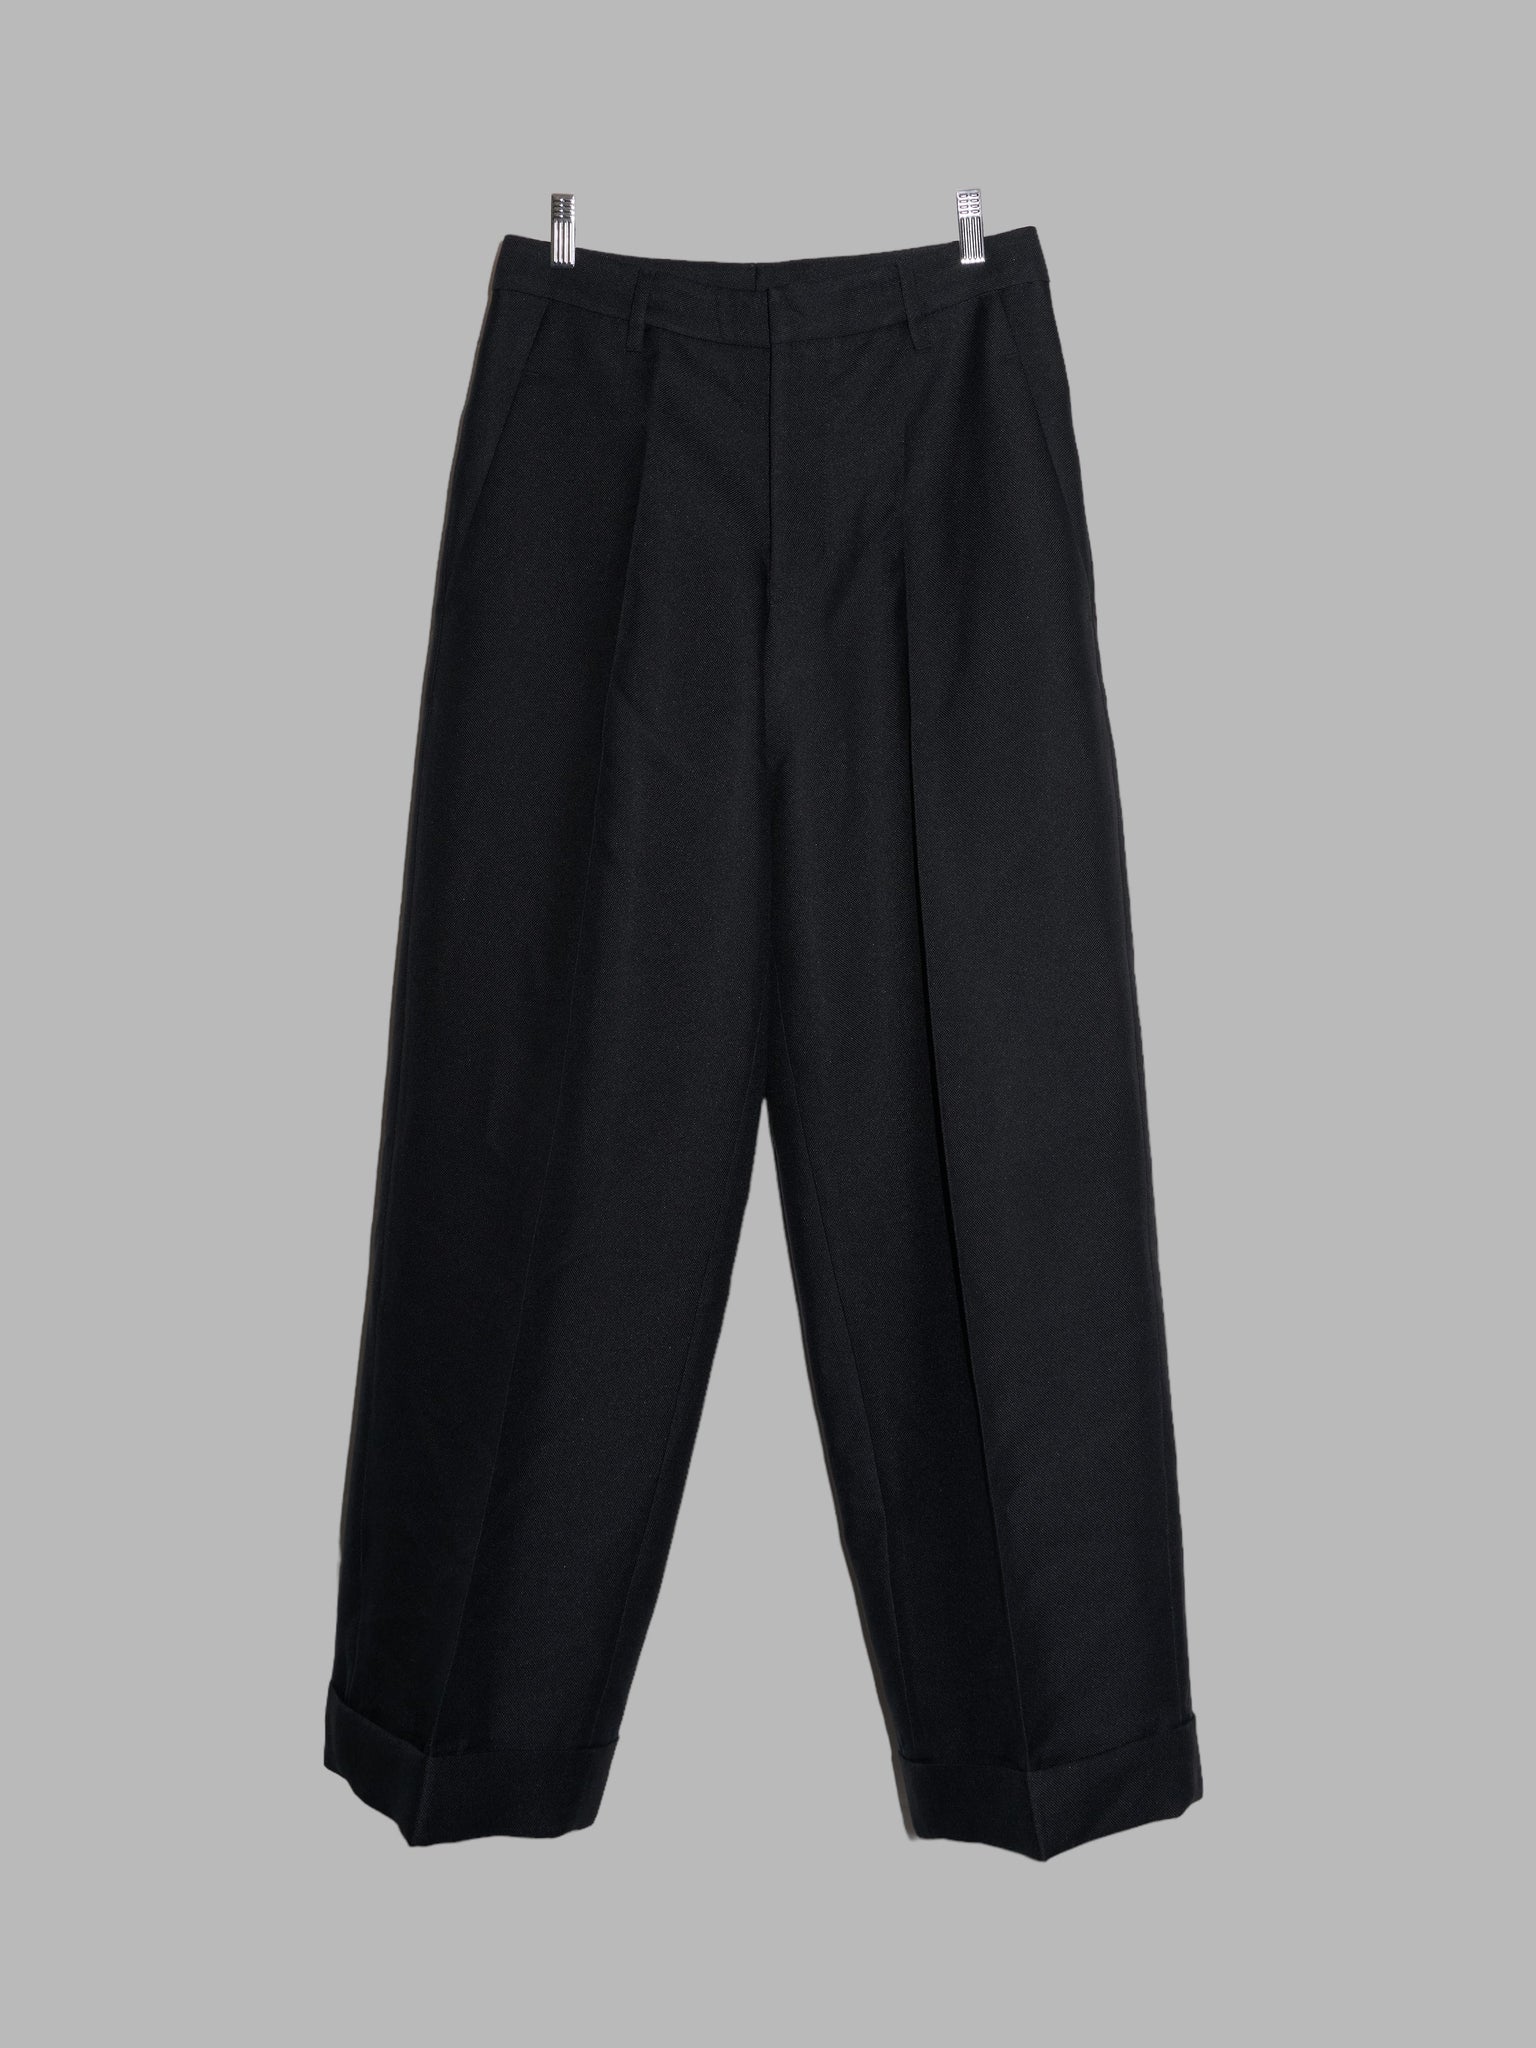 Dirk Bikkembergs 1990s 2000s black polyester canvas pleated trousers - size 46